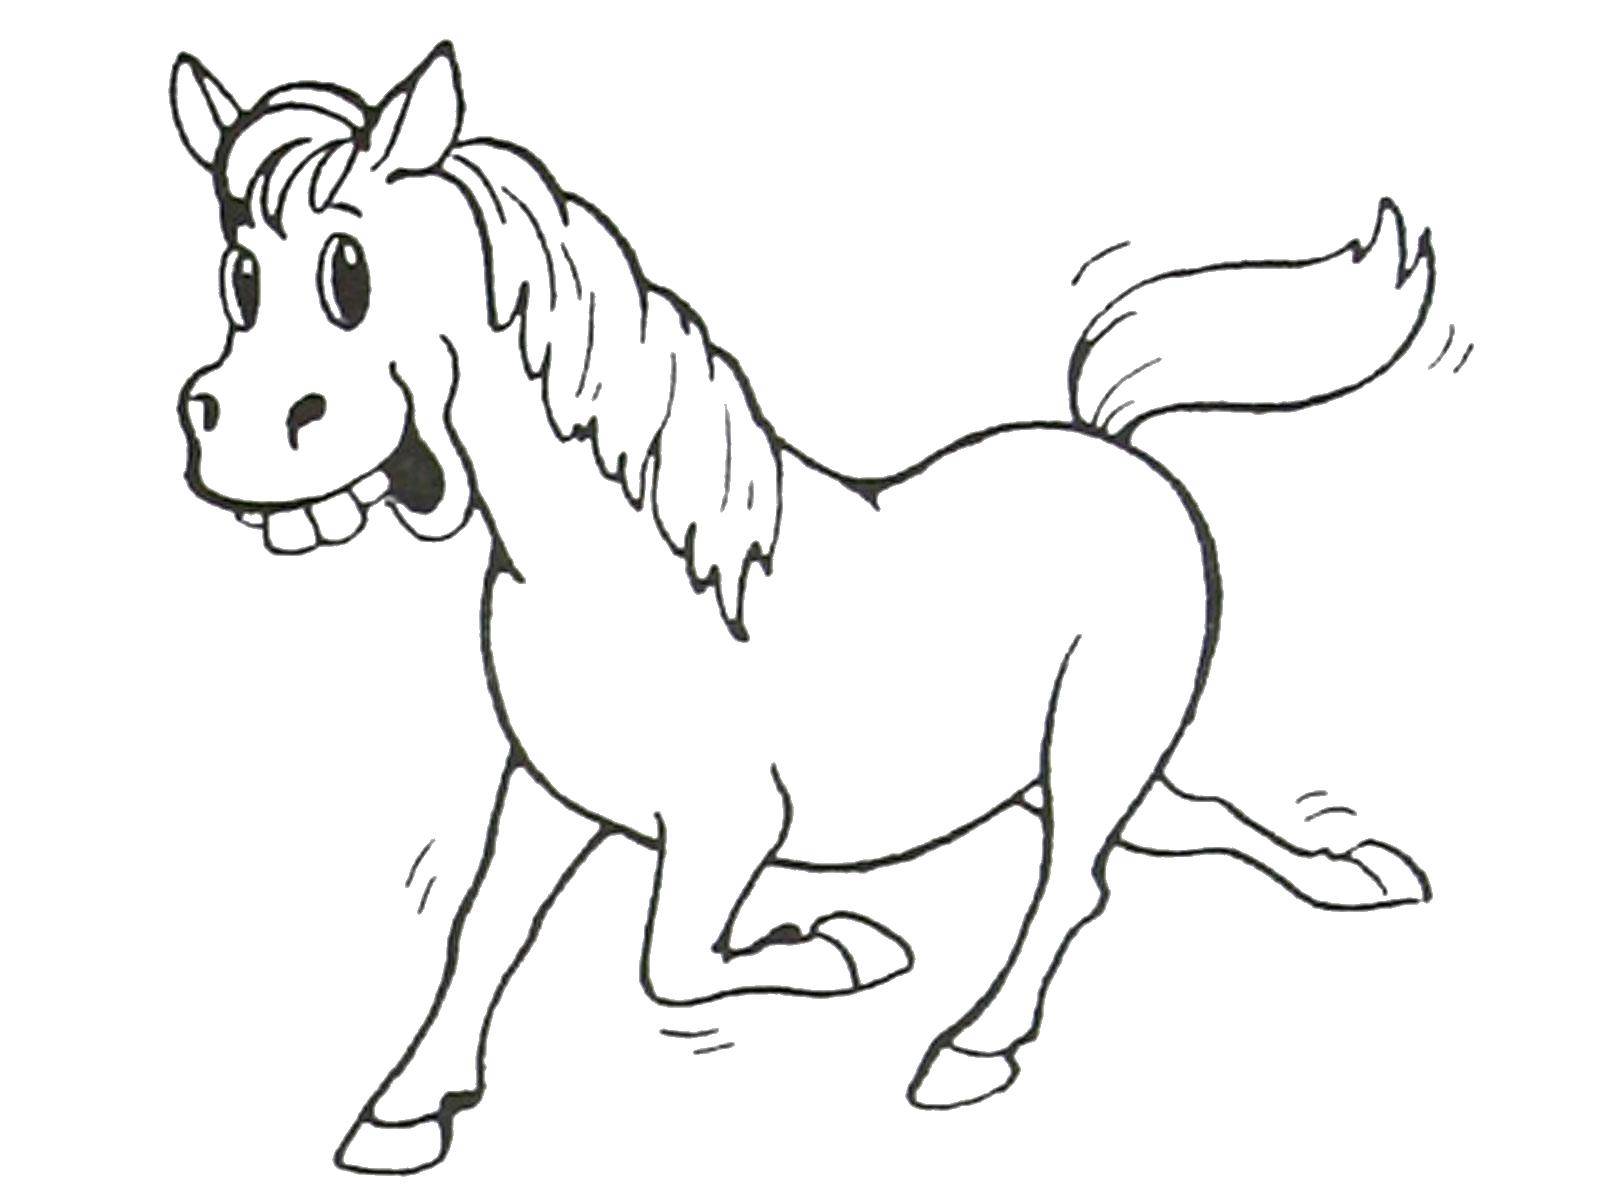 Coloring Funny horse. Category Pets allowed. Tags:  Animals, horse.